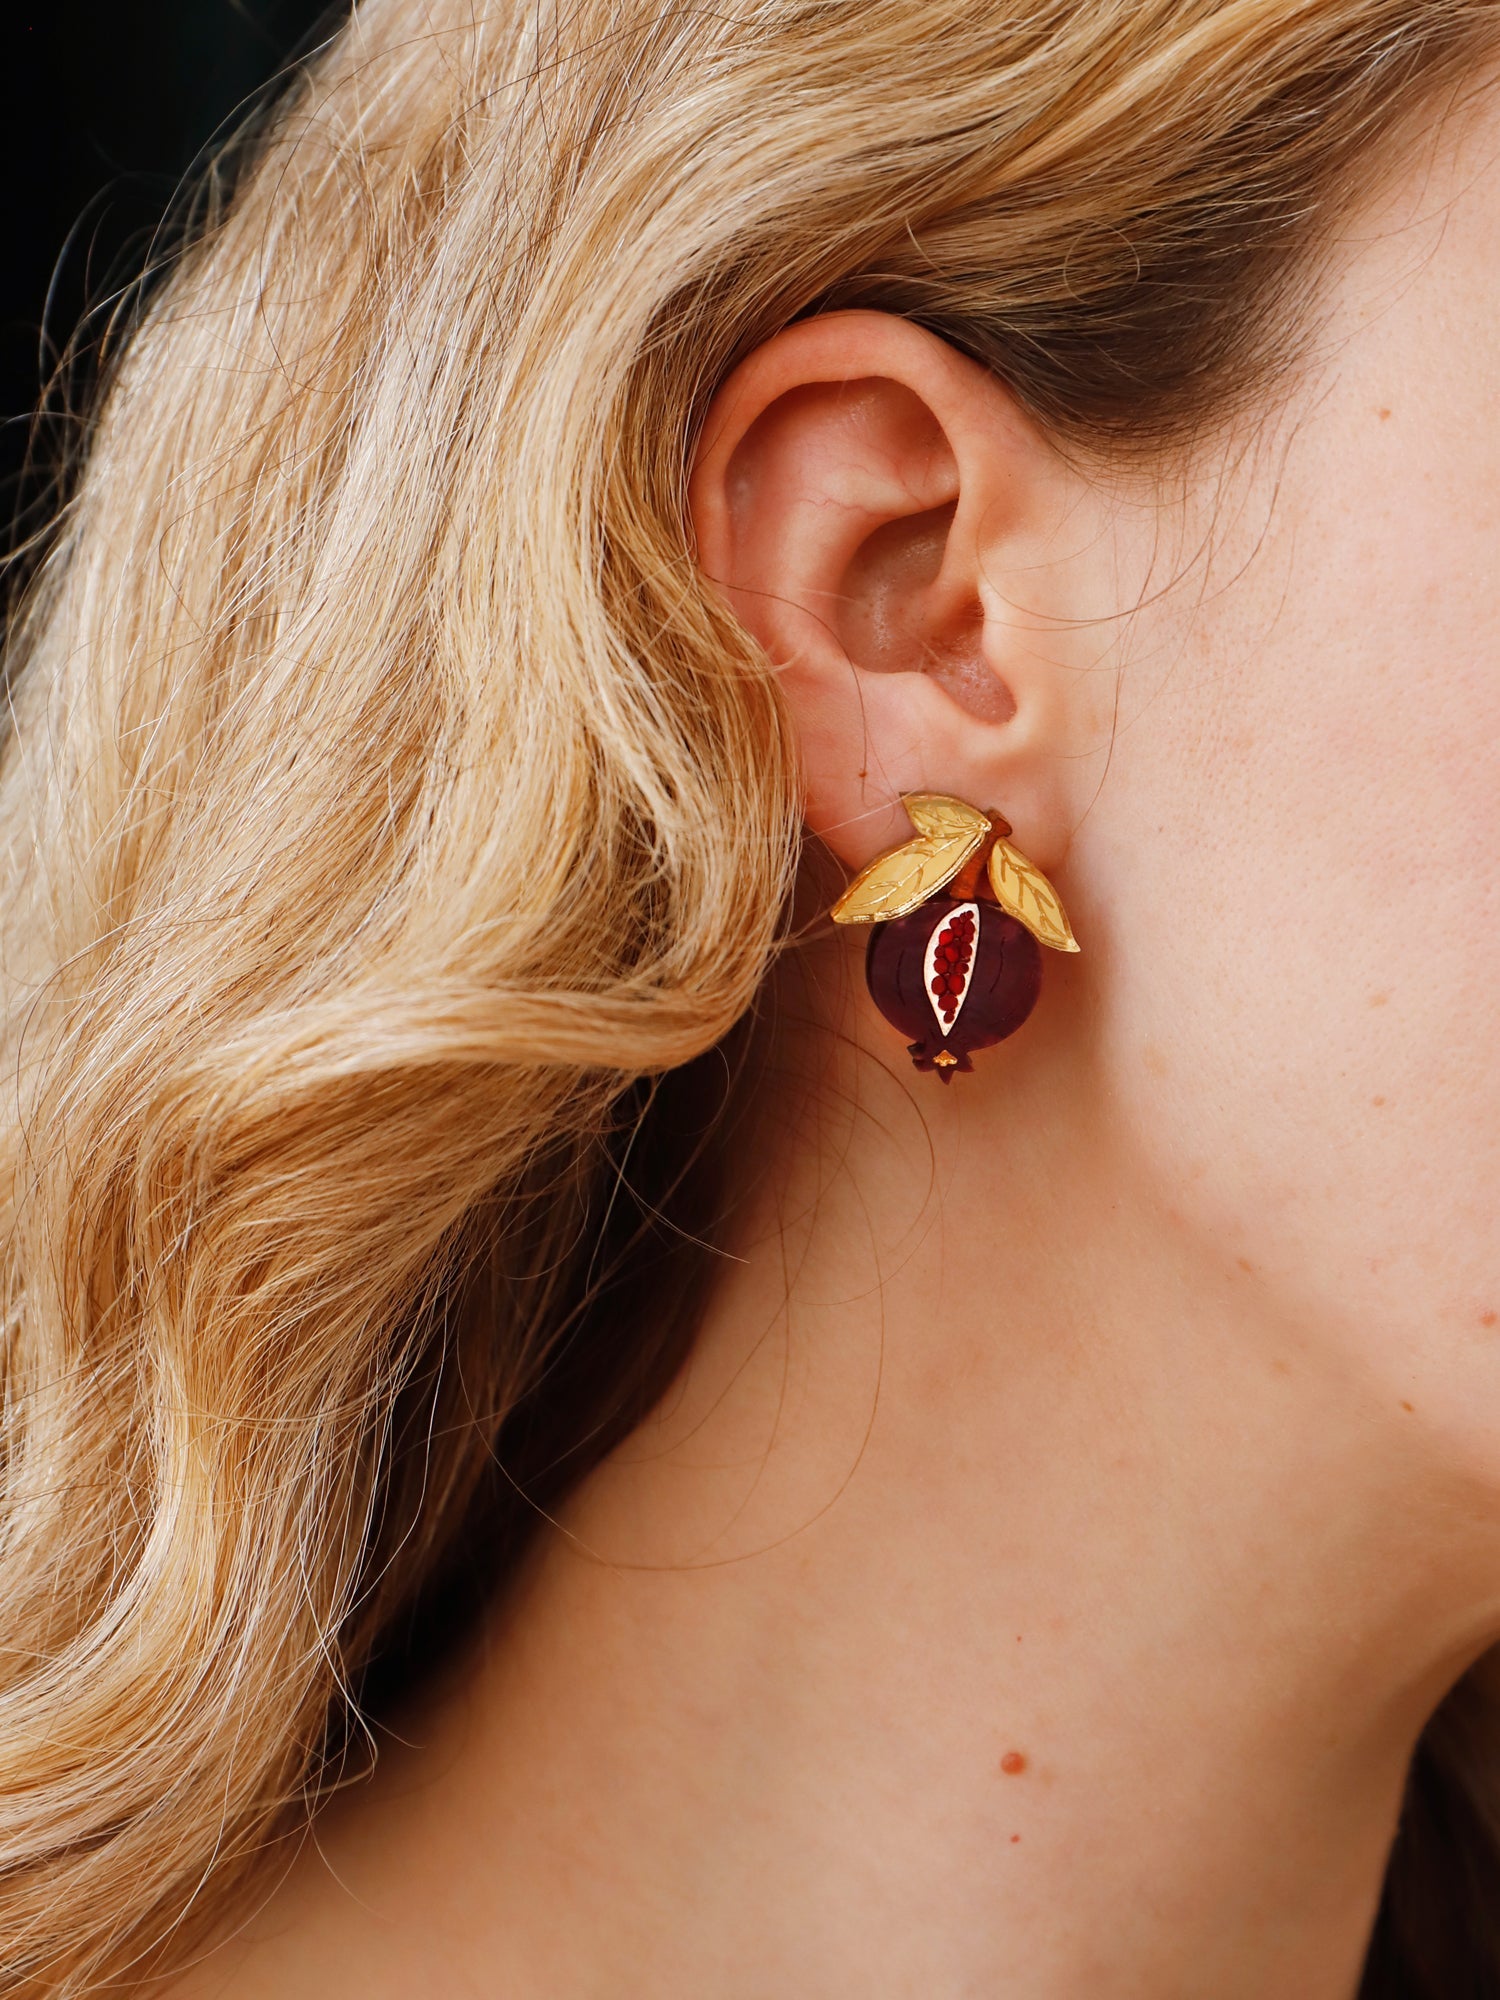 Pomegranate stud earrings made with wood, acrylic and hand-inked details. Handmade in the UK by Wolf & Moon.